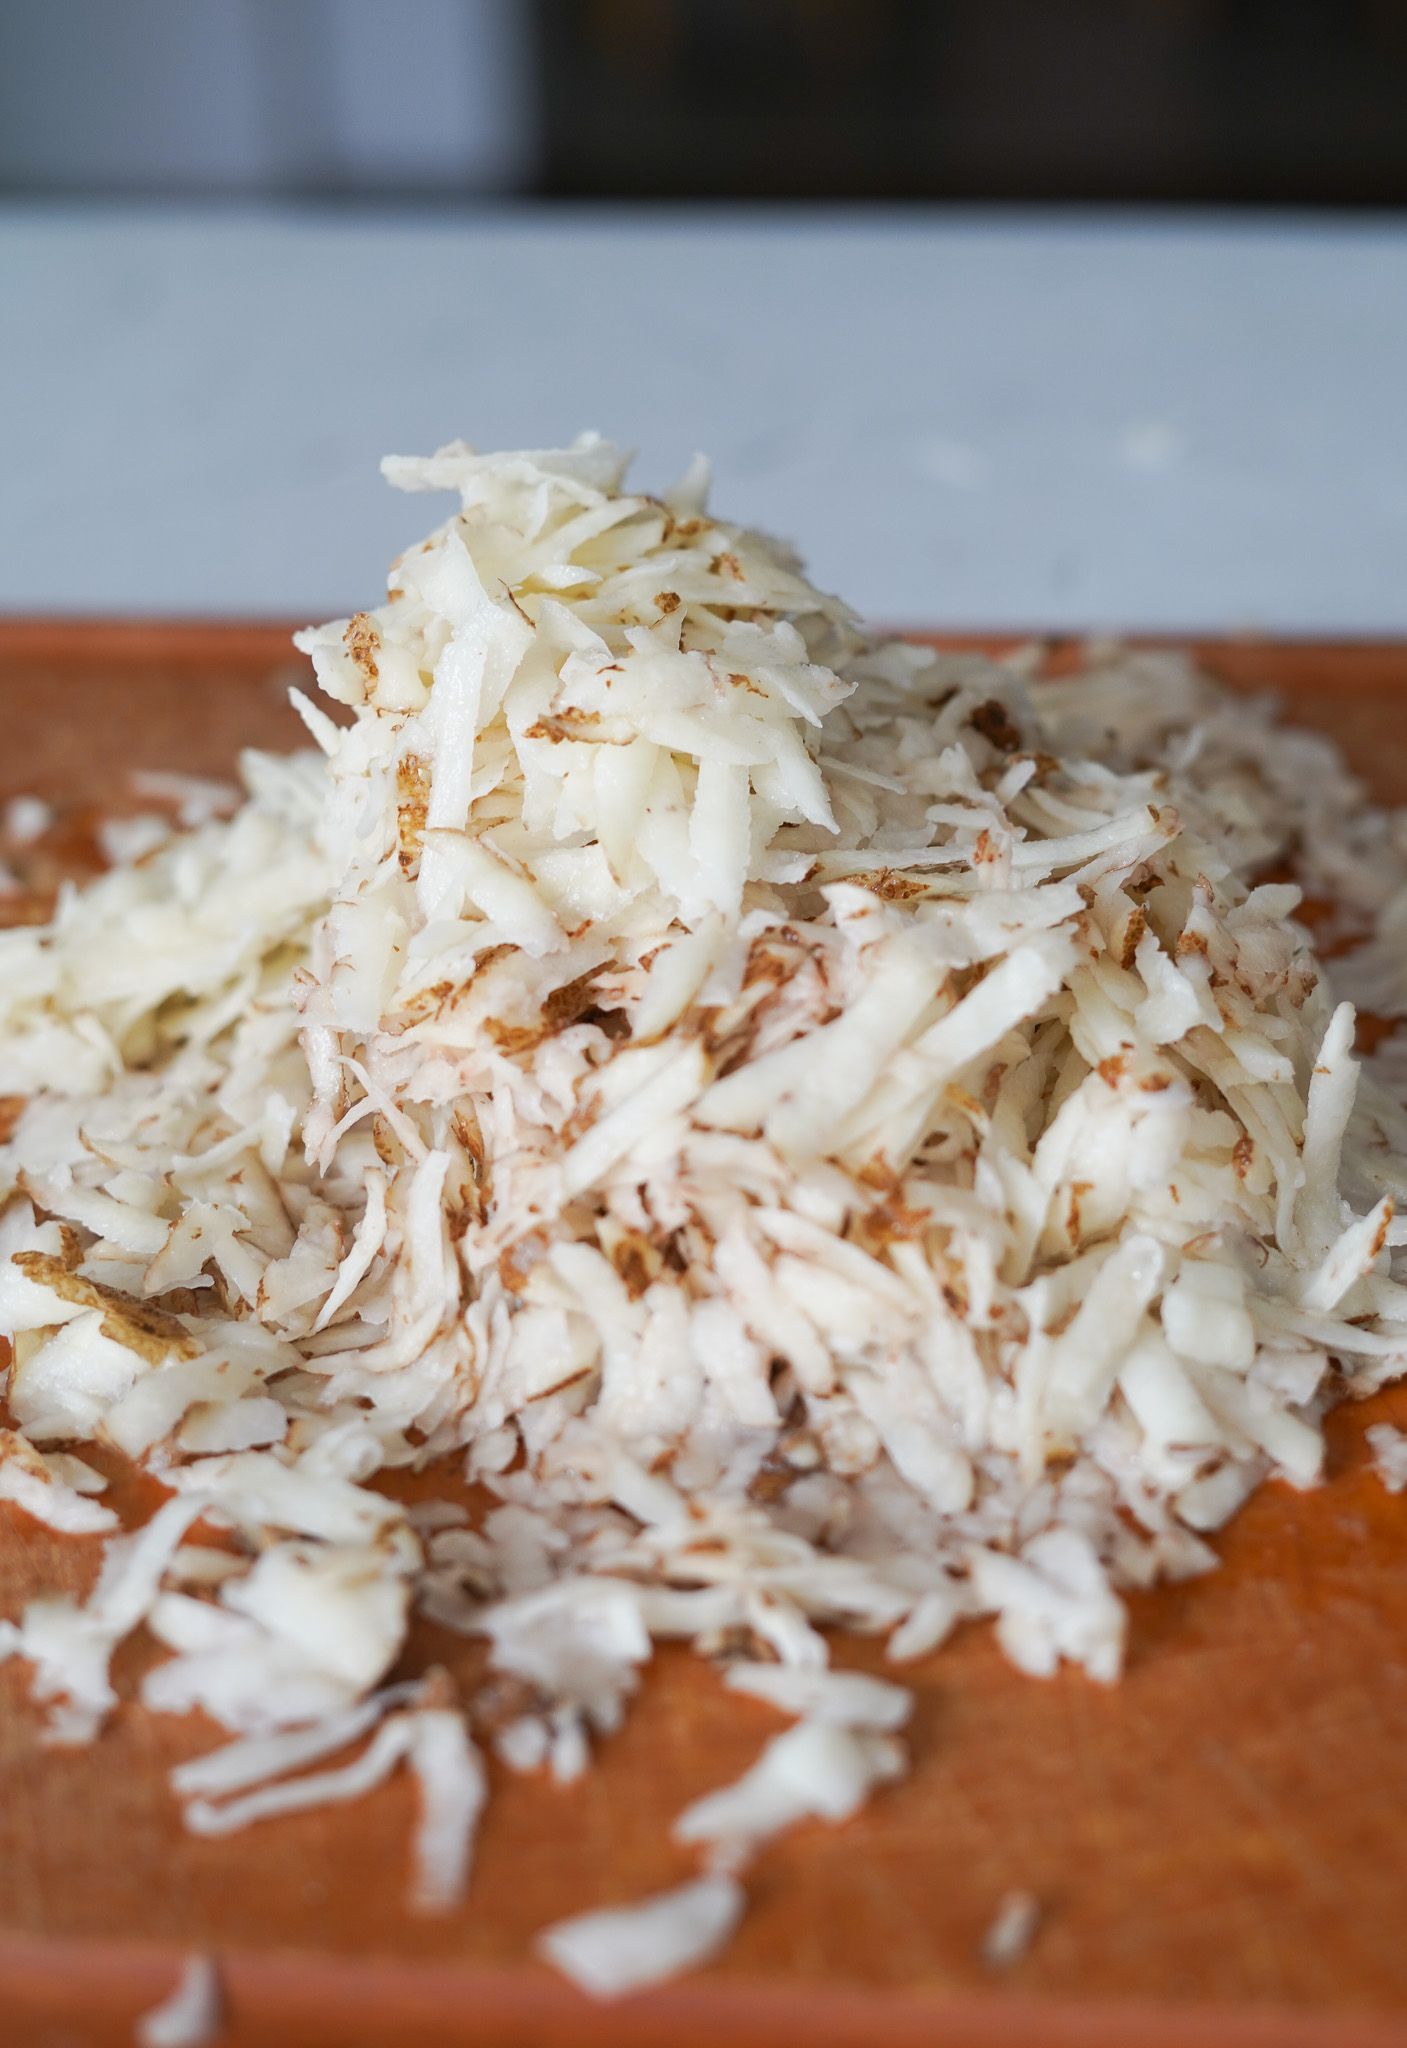 grated potatoes on a wooden cutting board